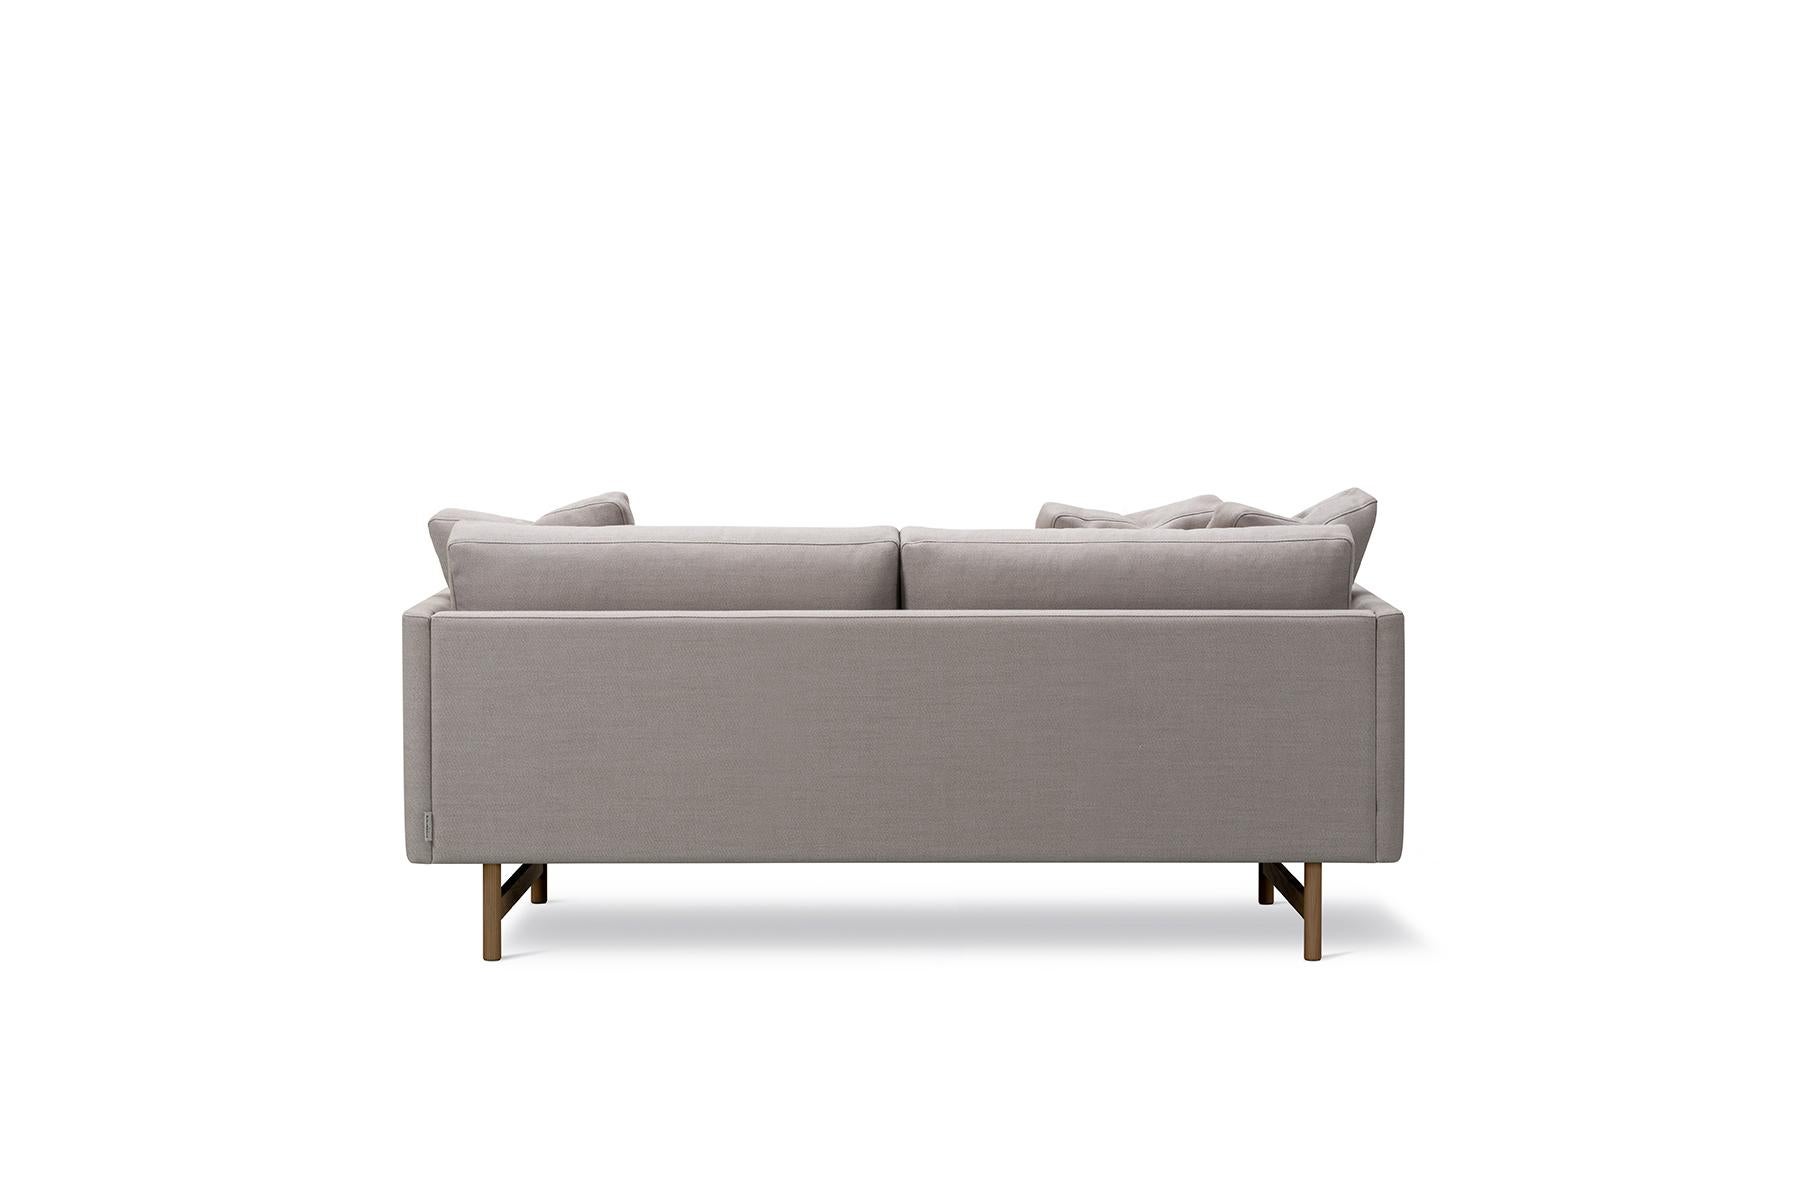 Hugo Passos Calmo sofa 80 – 2-seater – Wood base is simple and serene in this expansive 3-seater Calmo sofa, where straight lines converge with discrete curved details. Comfy cushions complete the picture in this understated expression of elegance.